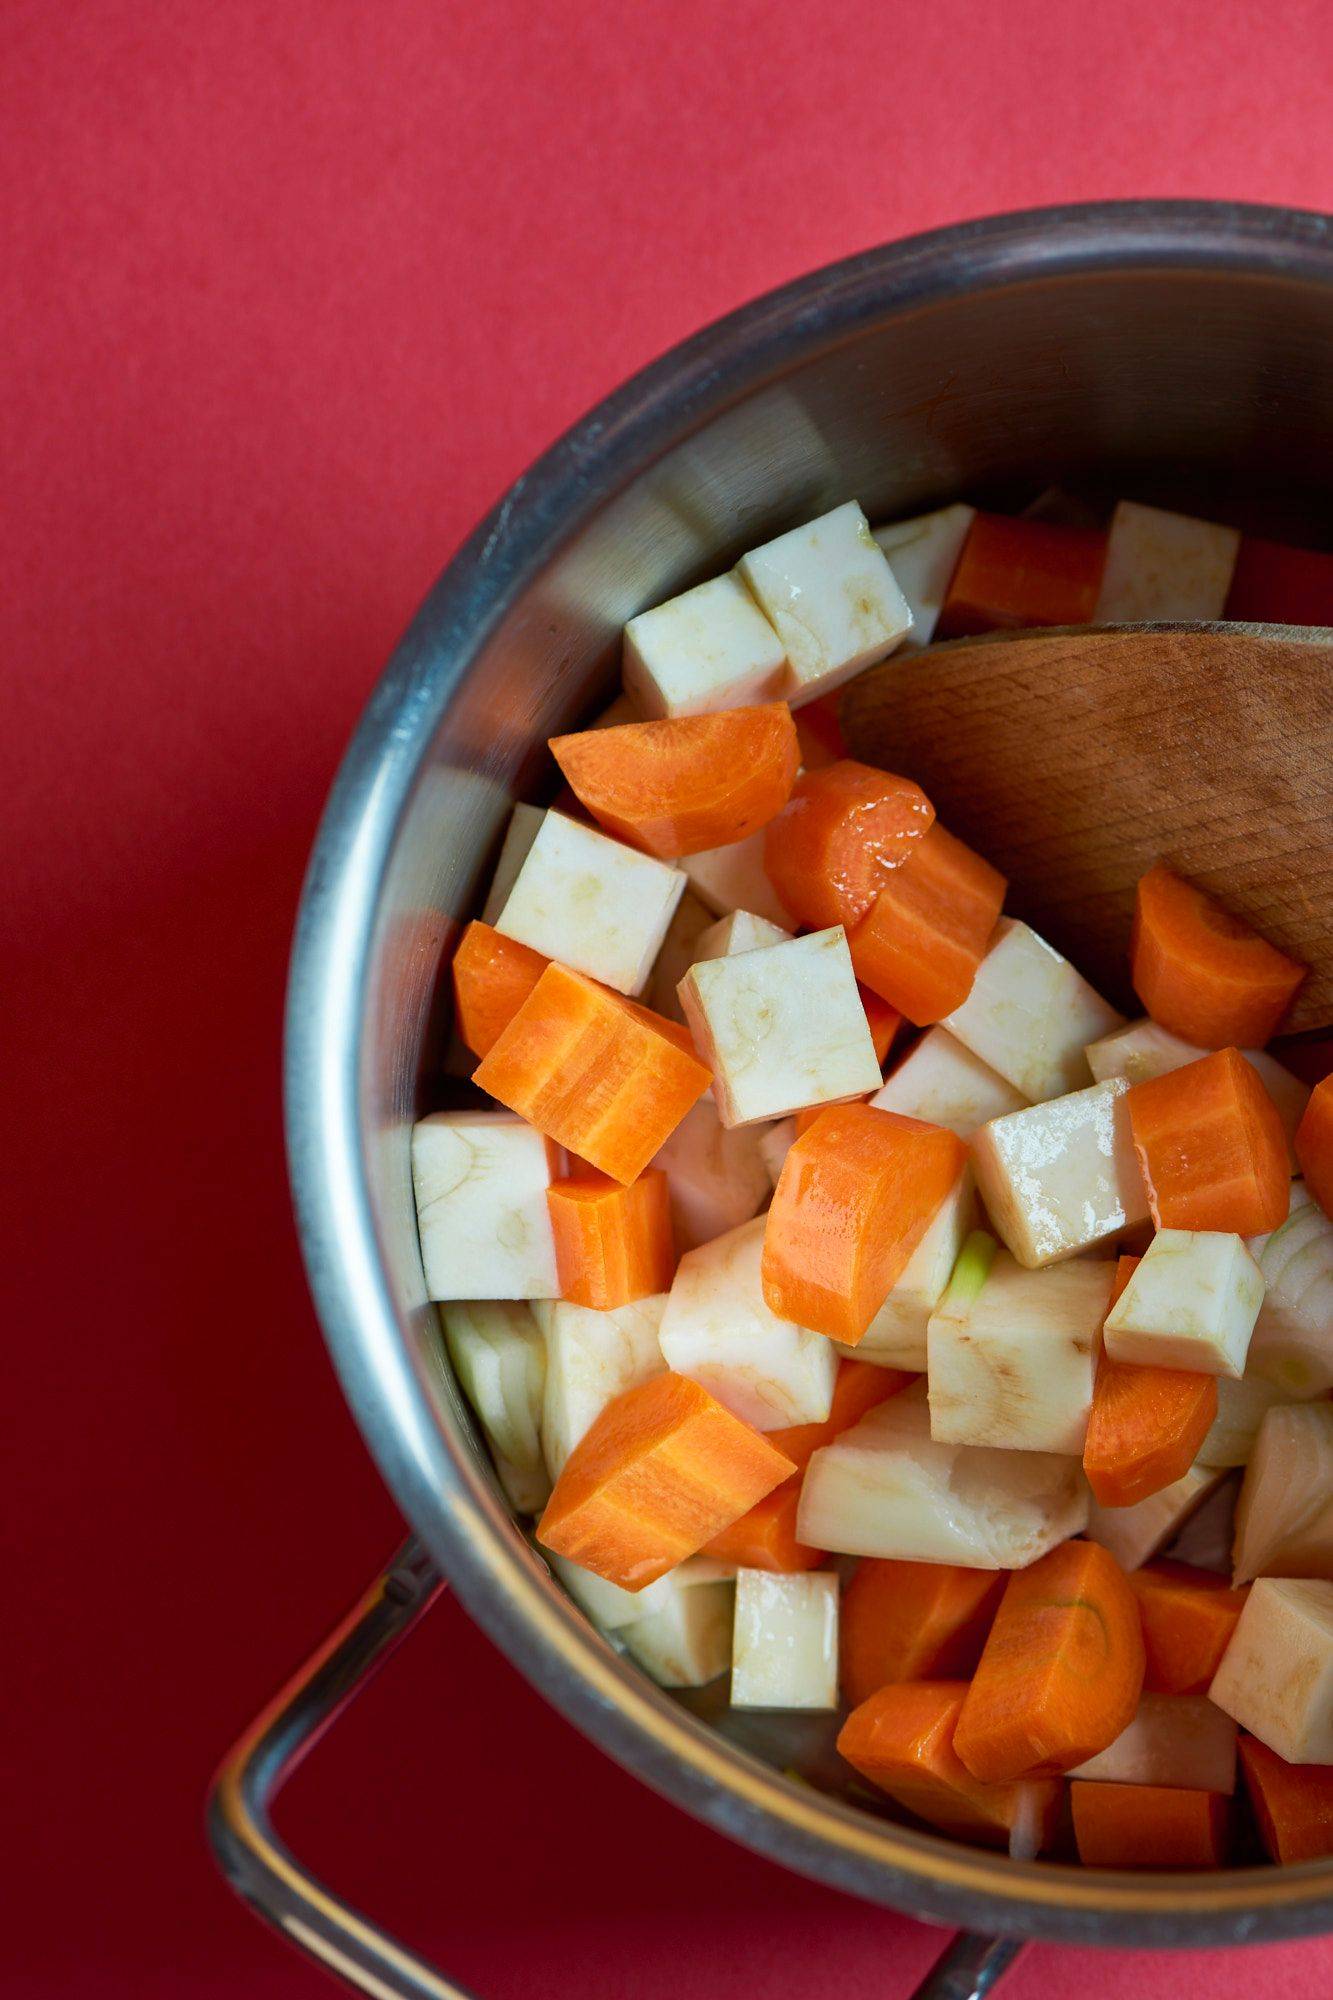 carrots and celeriac in a pot with red background